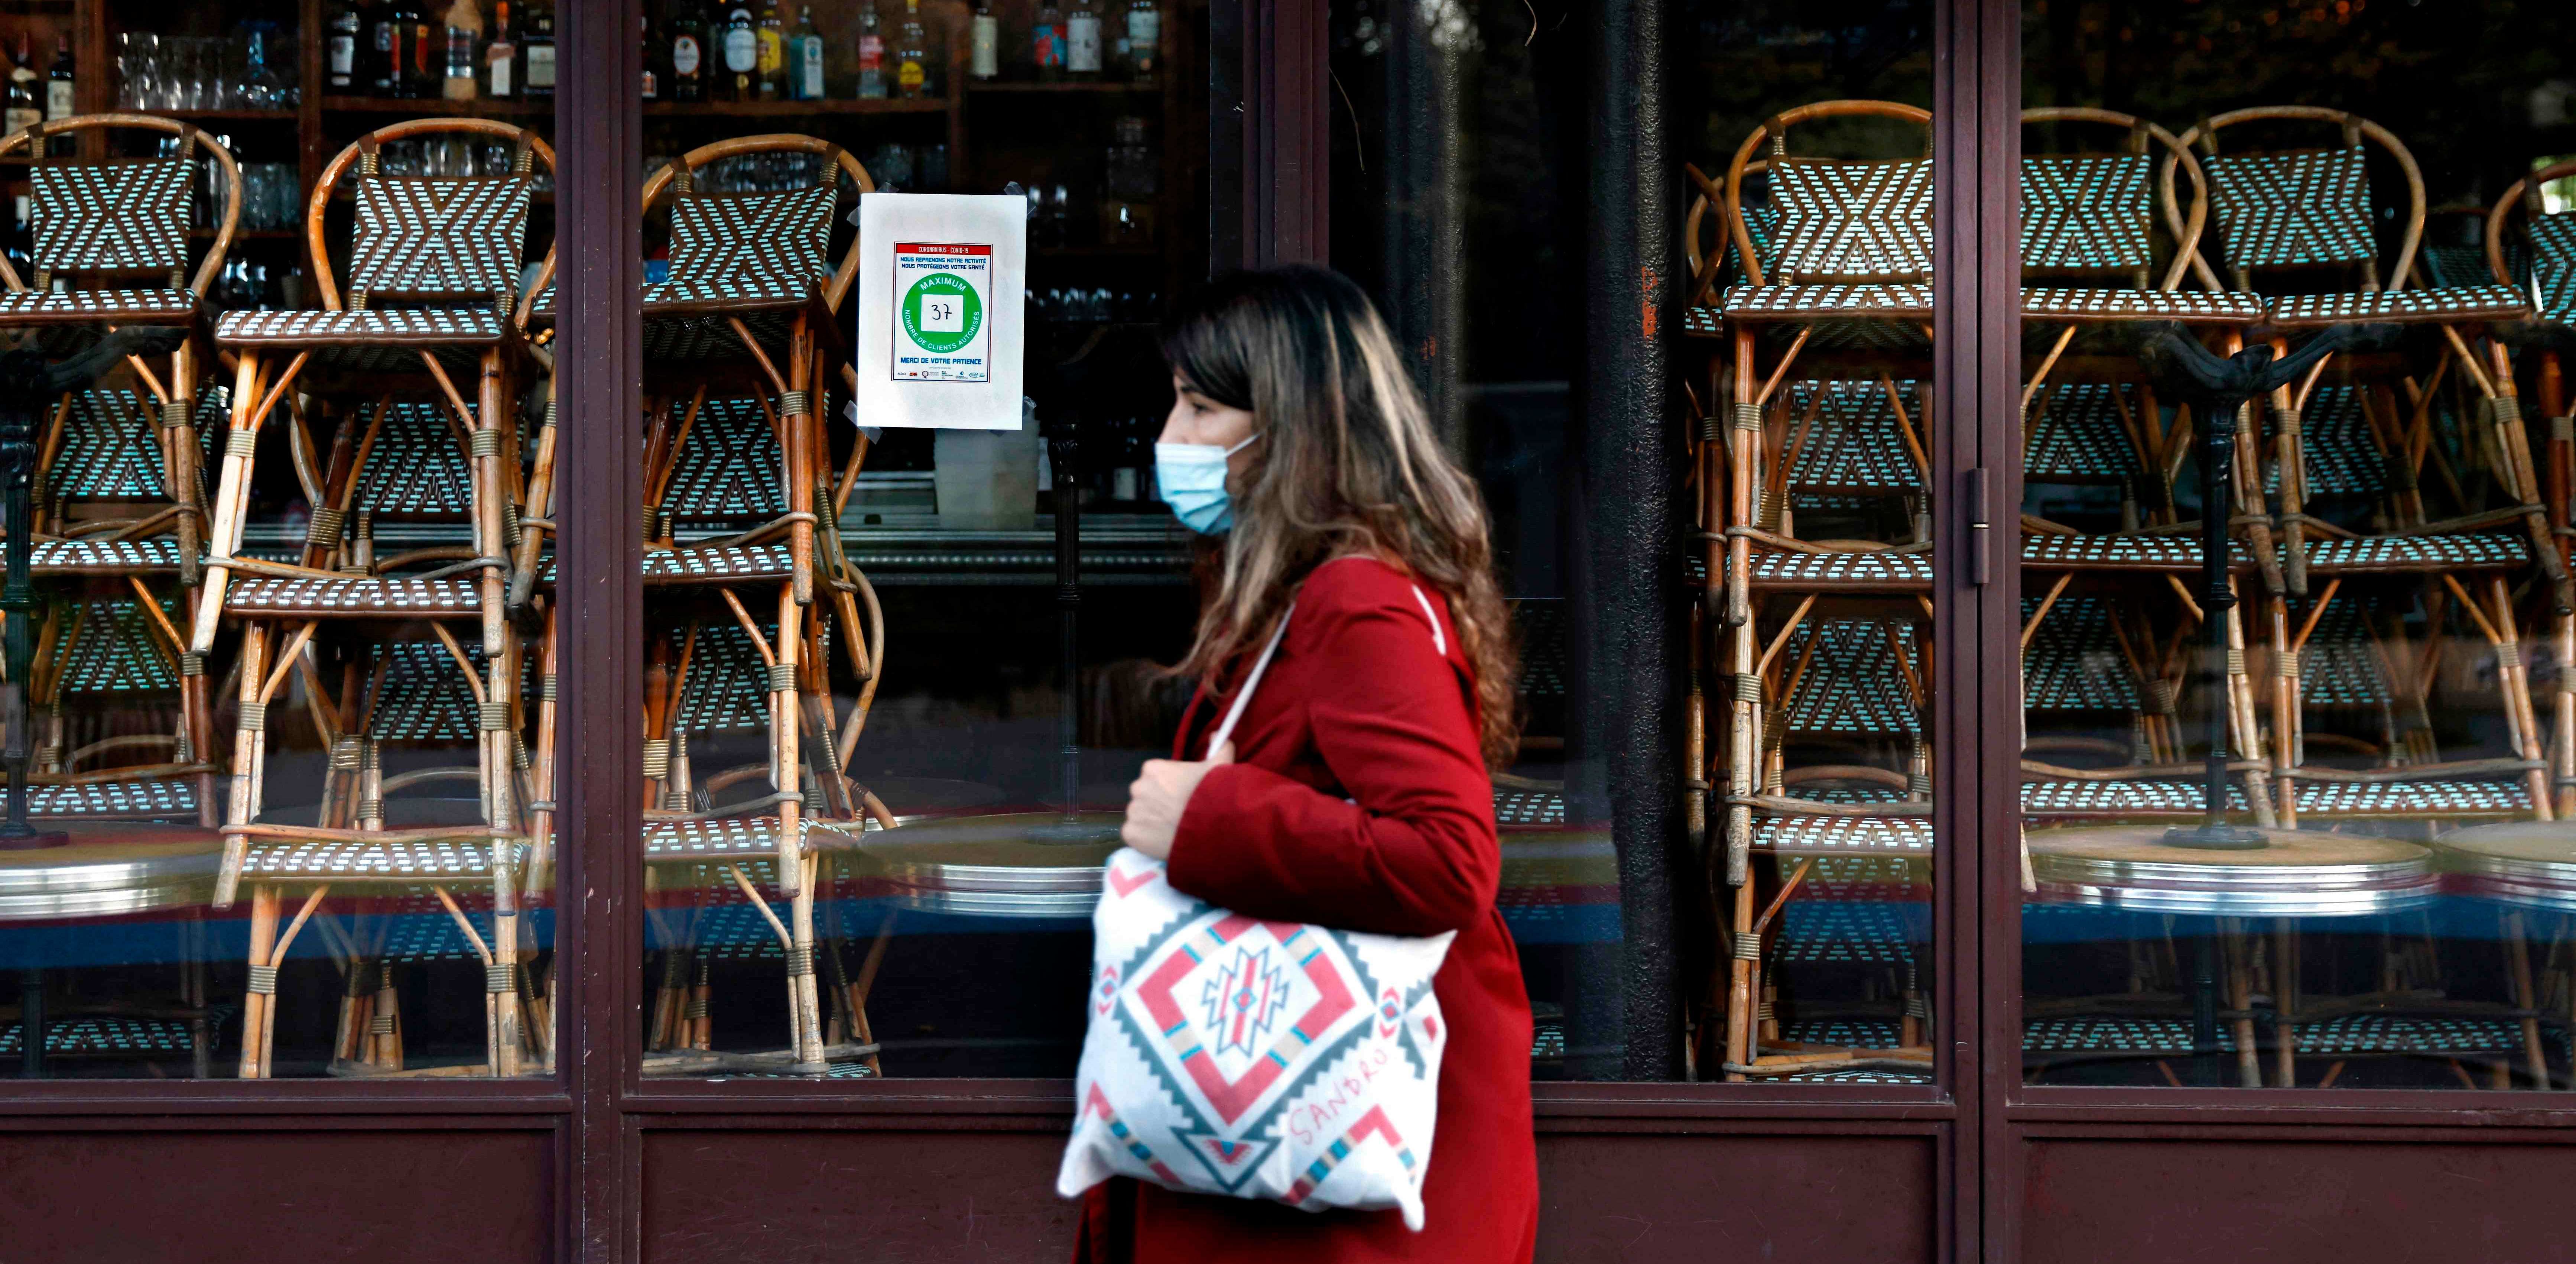 A woman walks past a closed restaurant in Paris on November 18, 2020, amid a second lockdown in France aimed at containing the spread of Covid-19 pandemic caused by the novel coronavirus. Credit: AFP